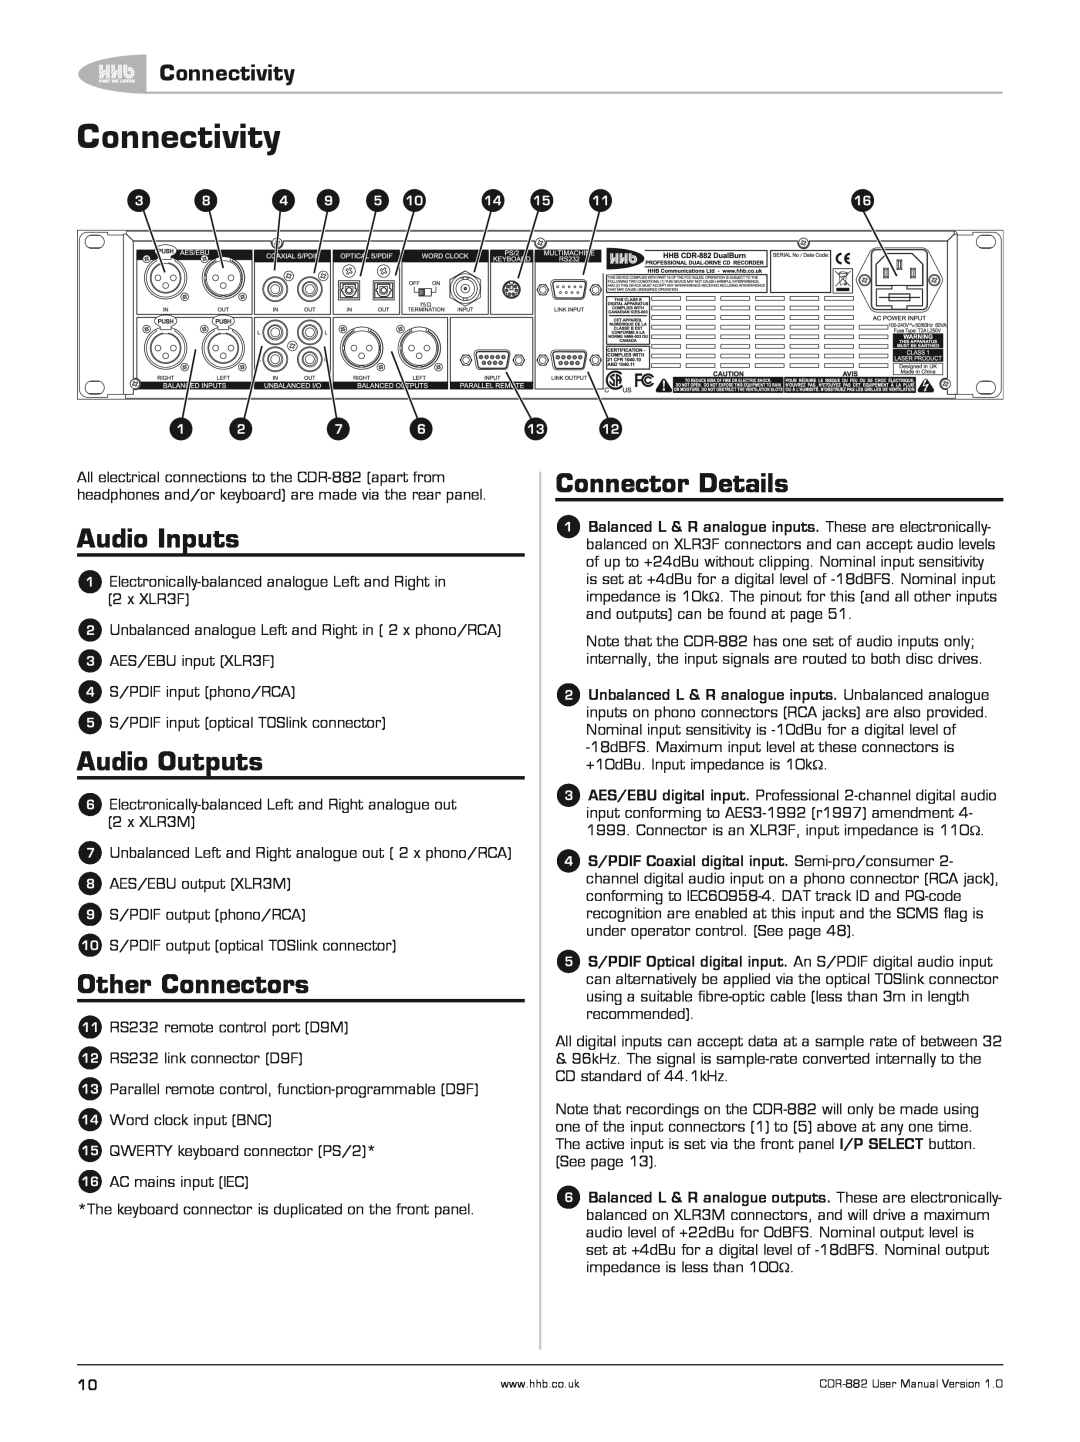 HHB comm CDR-882 user manual Connectivity, Audio Inputs, Audio Outputs, Other Connectors, Connector Details 